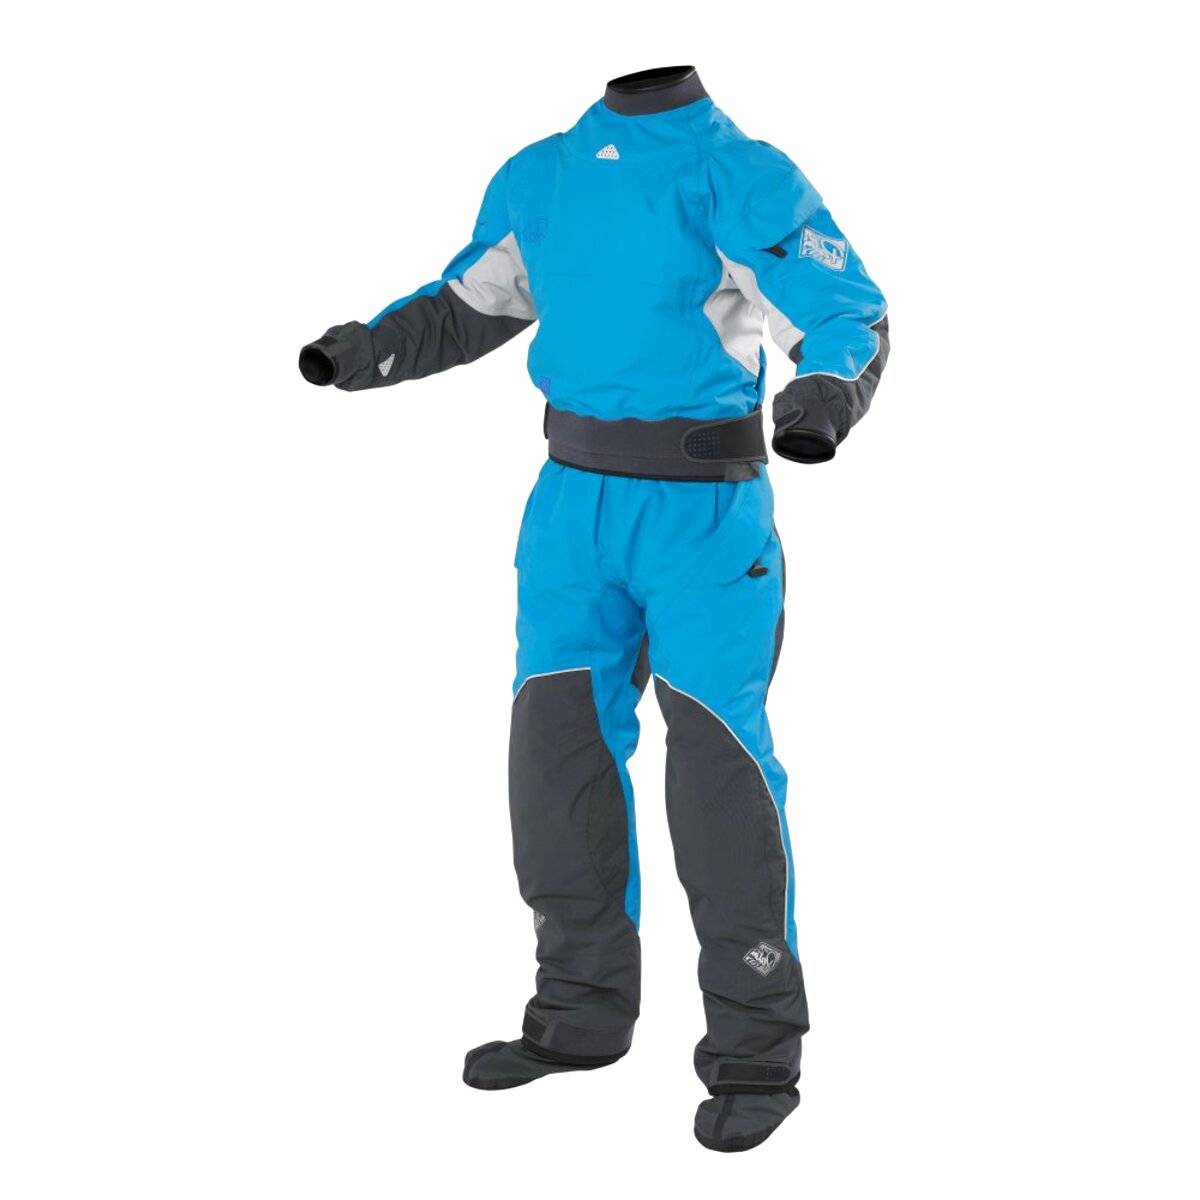 Palm Dry Suit for sale in UK | 39 used Palm Dry Suits